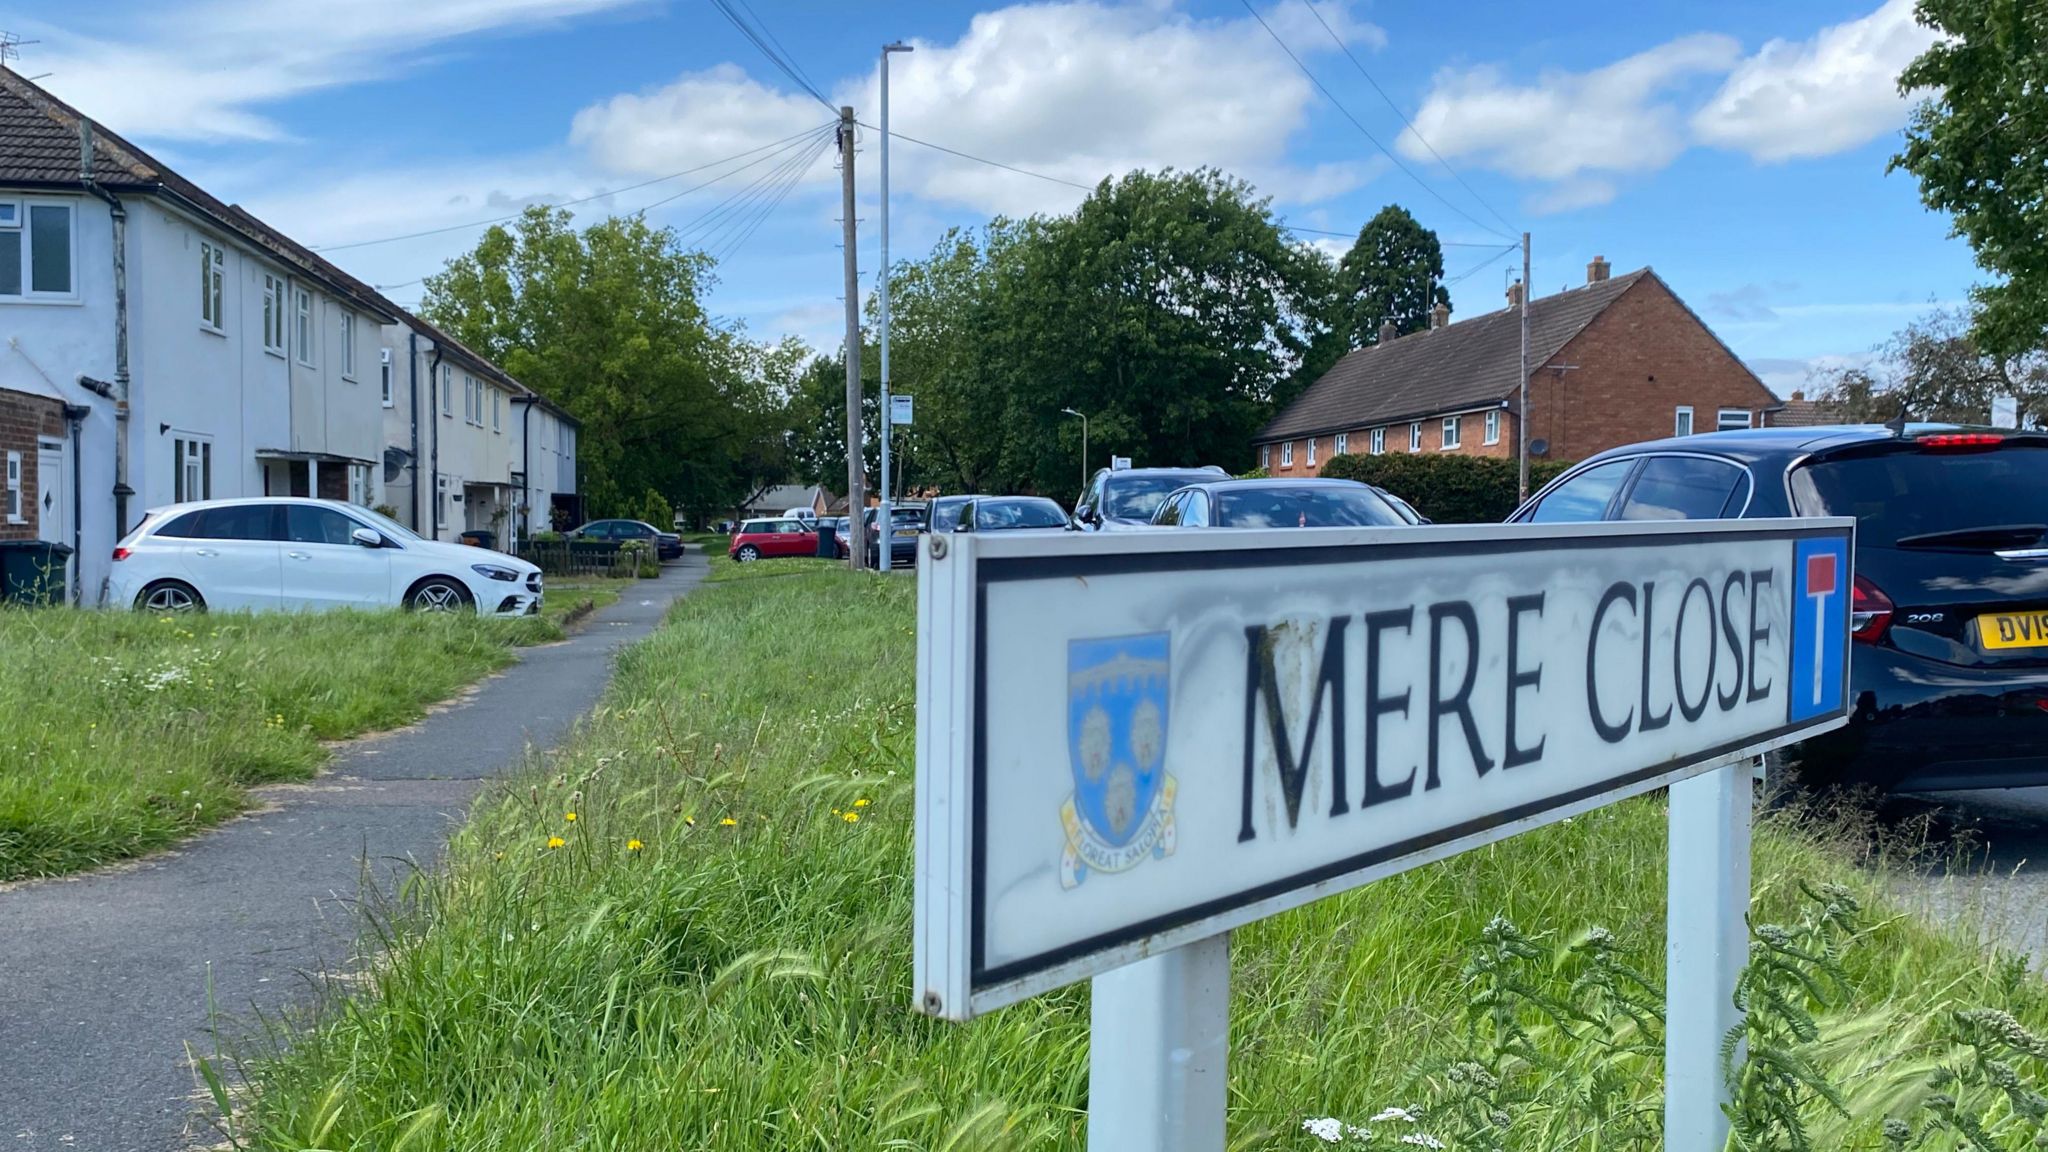 A street sign for Mere Close, with cars parked along the road in the background